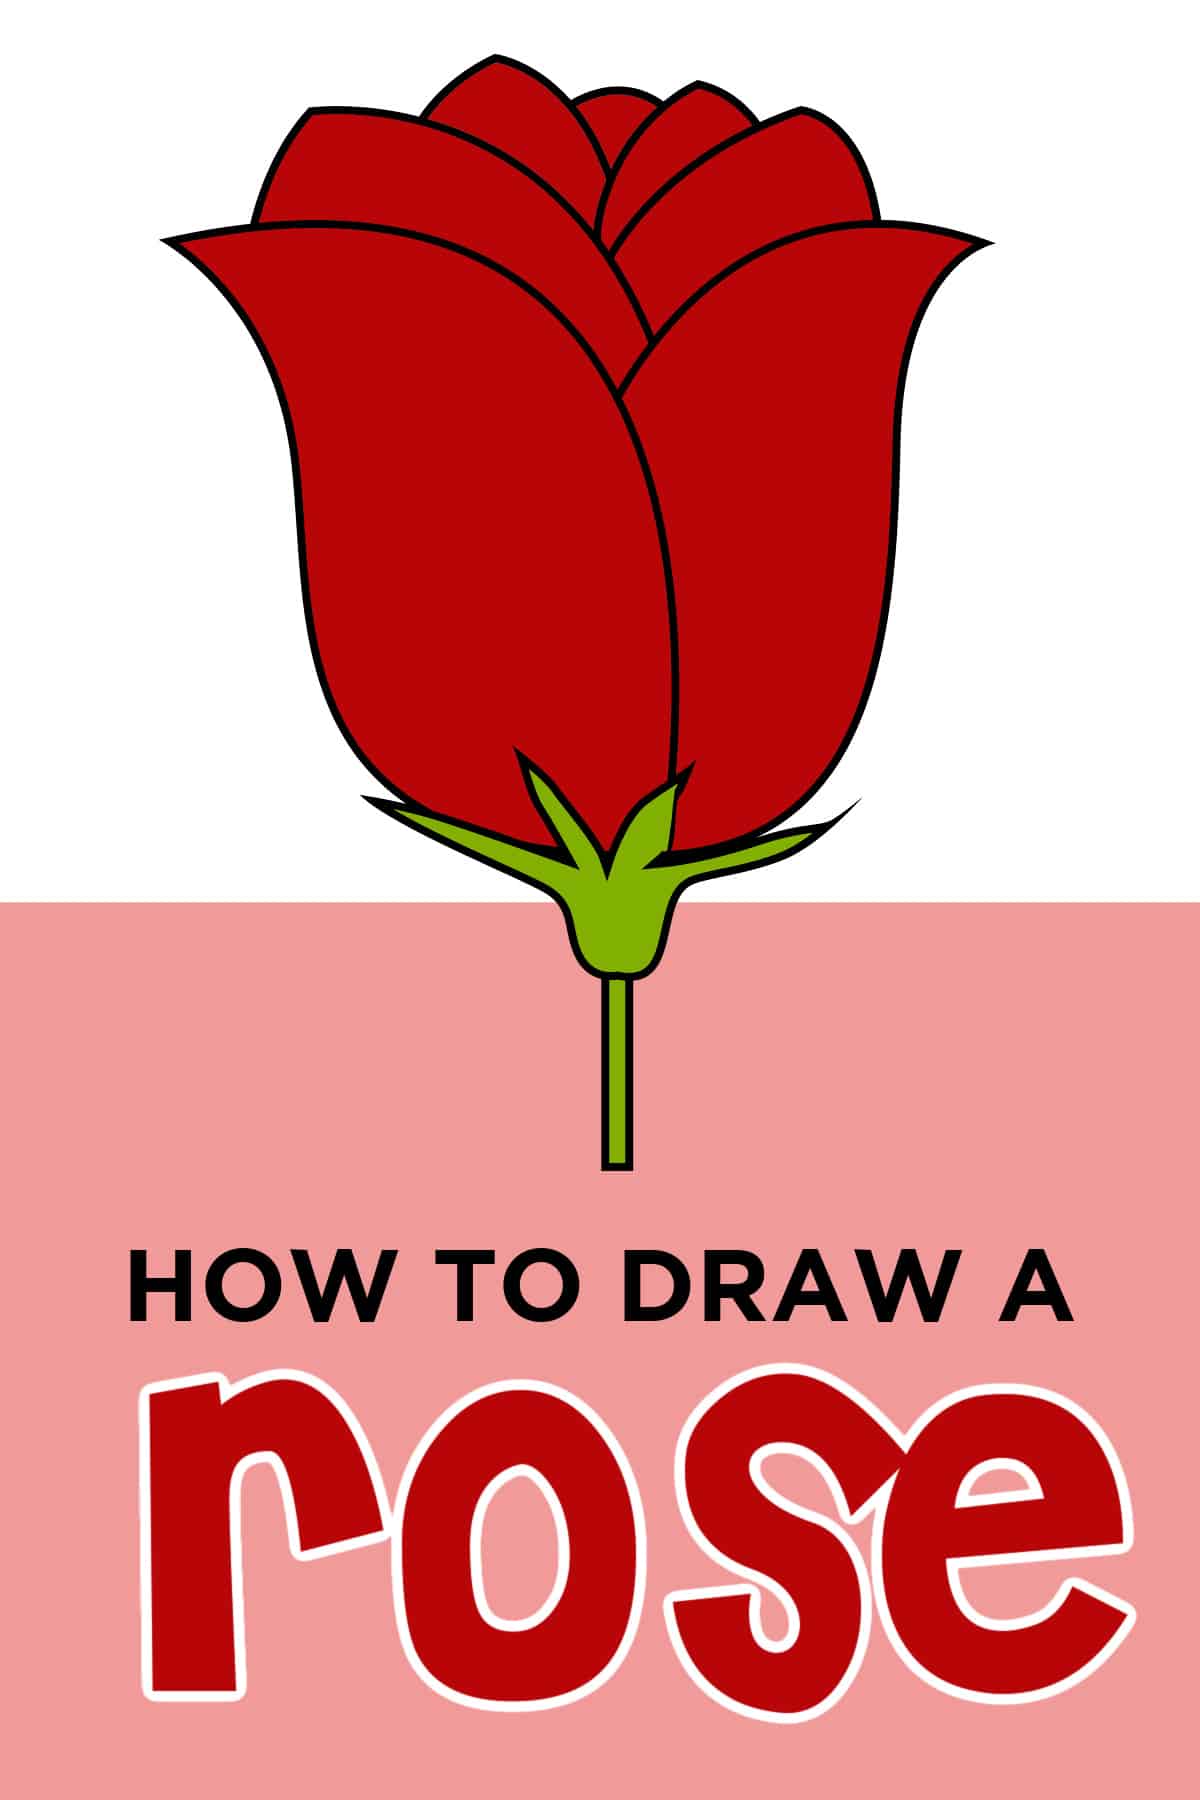 Rose Drawings For Kids - ClipArt Best